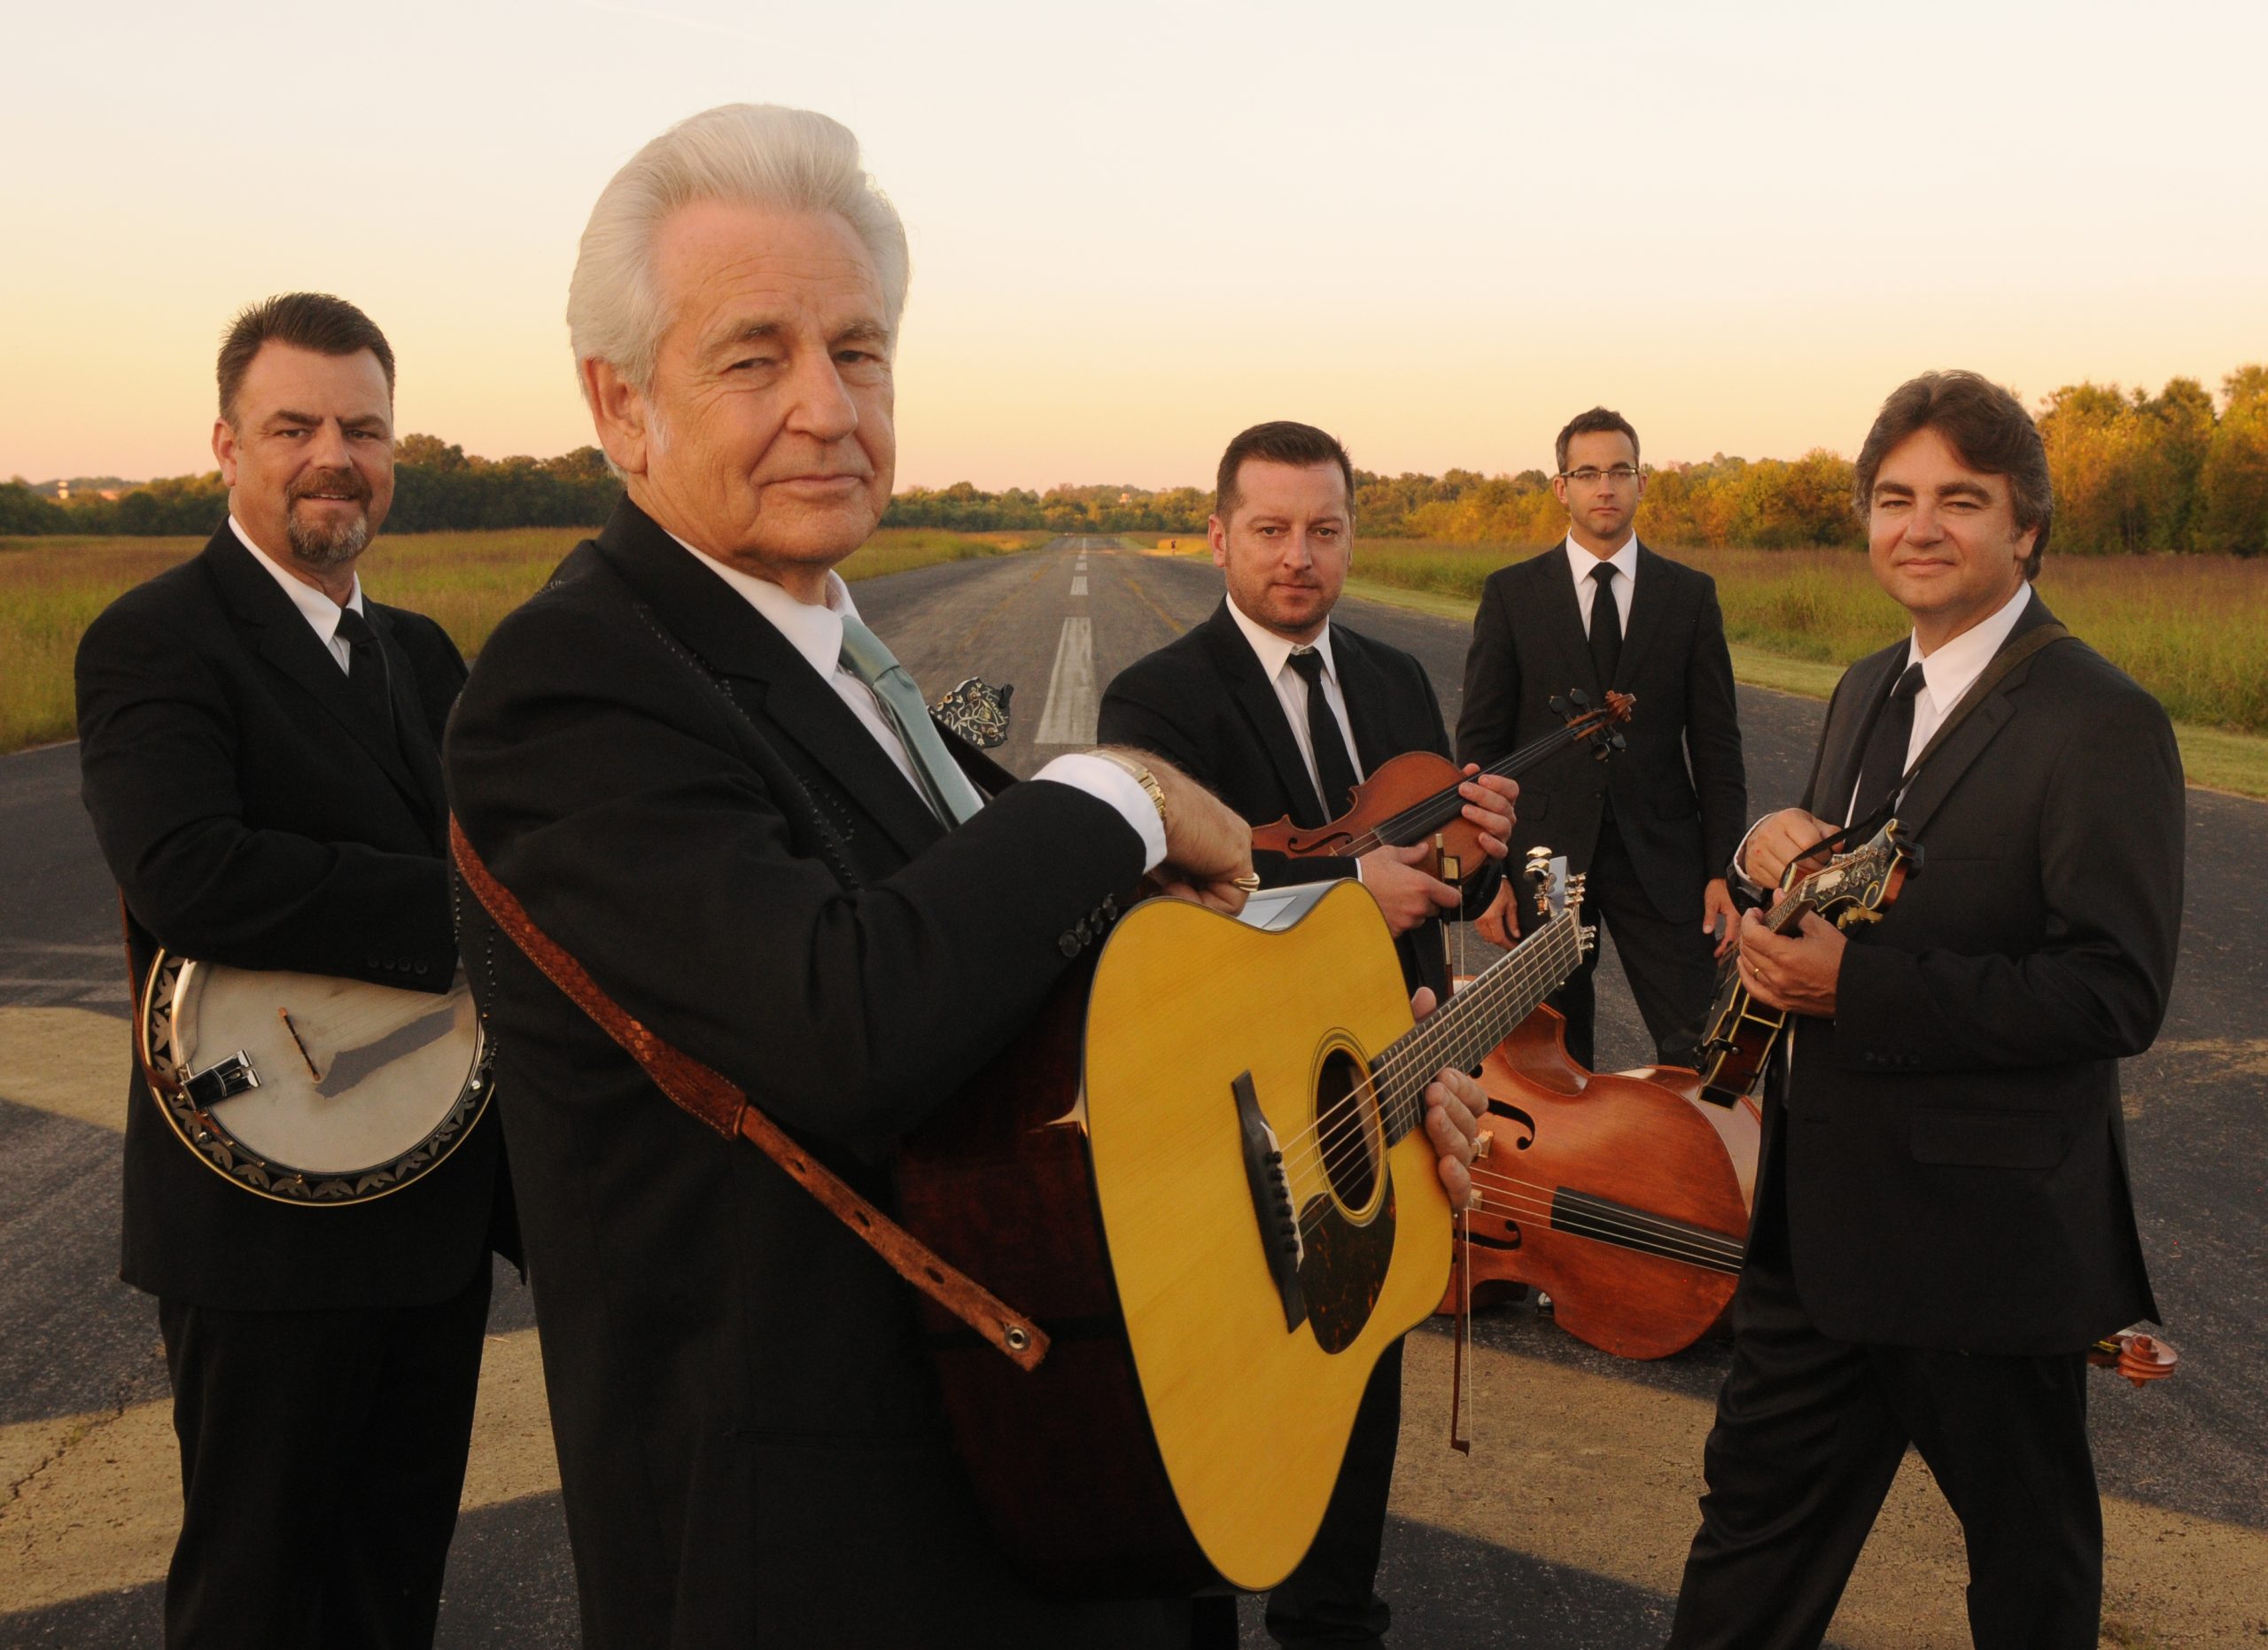 The Del McCoury Band Returns to The Barns